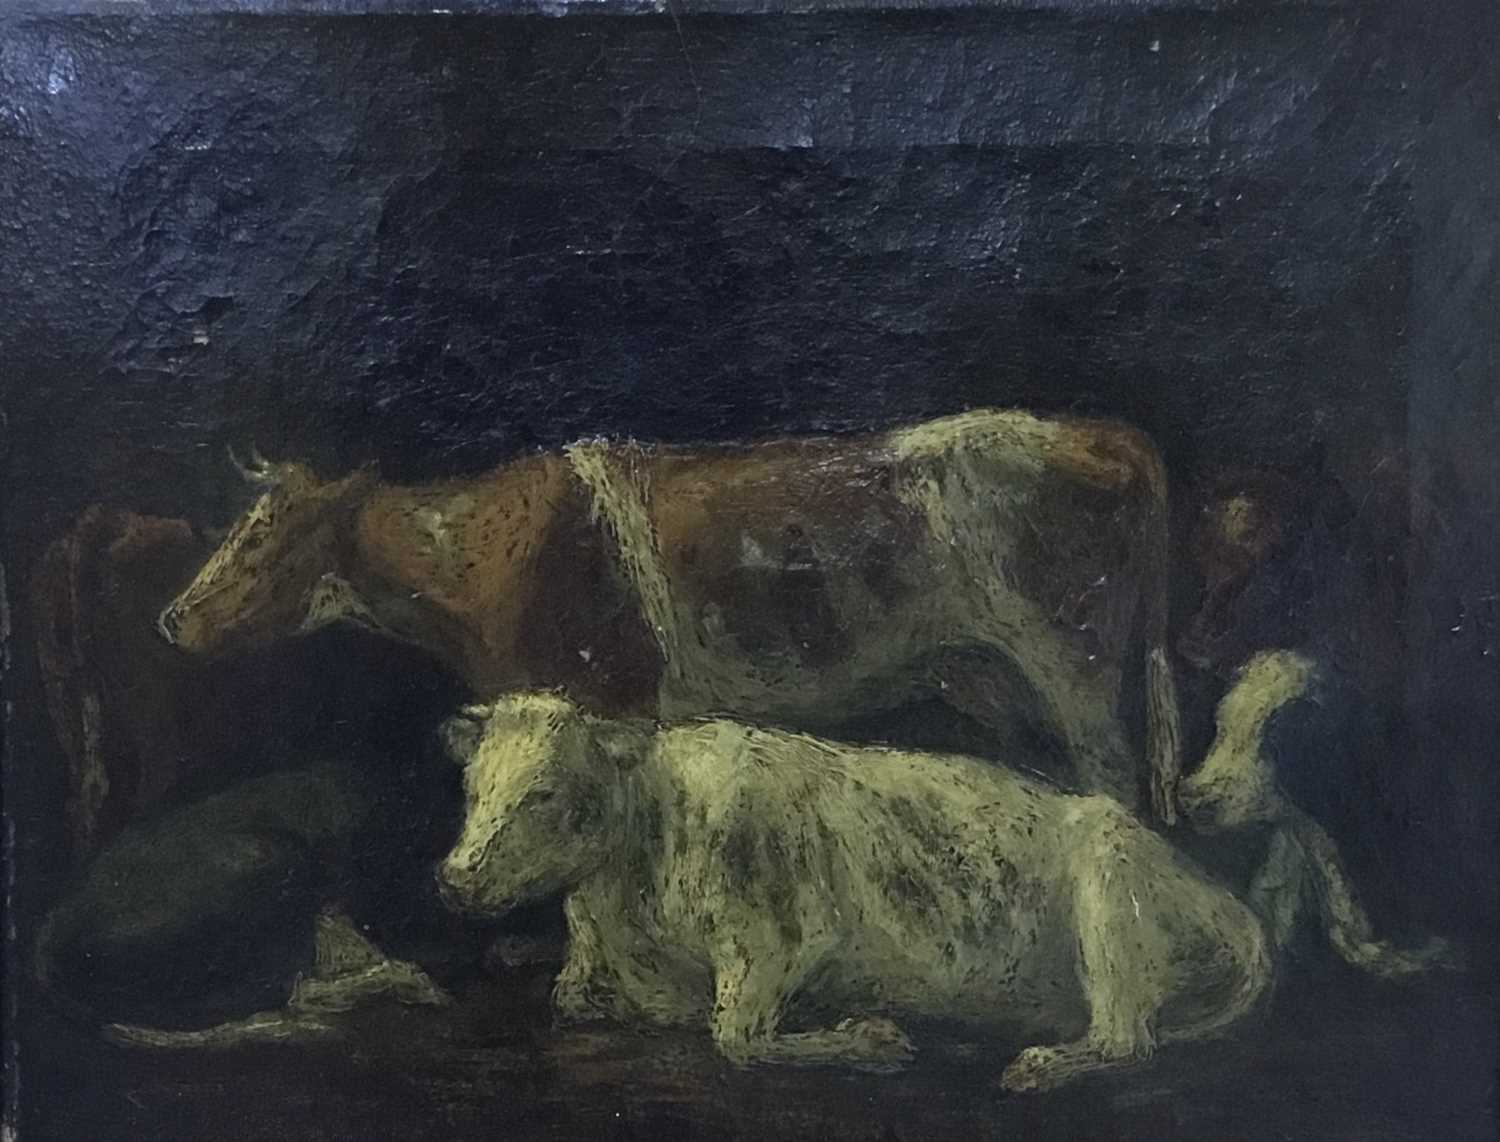 Lot 93 - English School, late 19th / early 20th century, oil on canvas - Cows in an interior, indistinctly inscribed in pencil to stretcher. 27 x 34cm, gilt frame